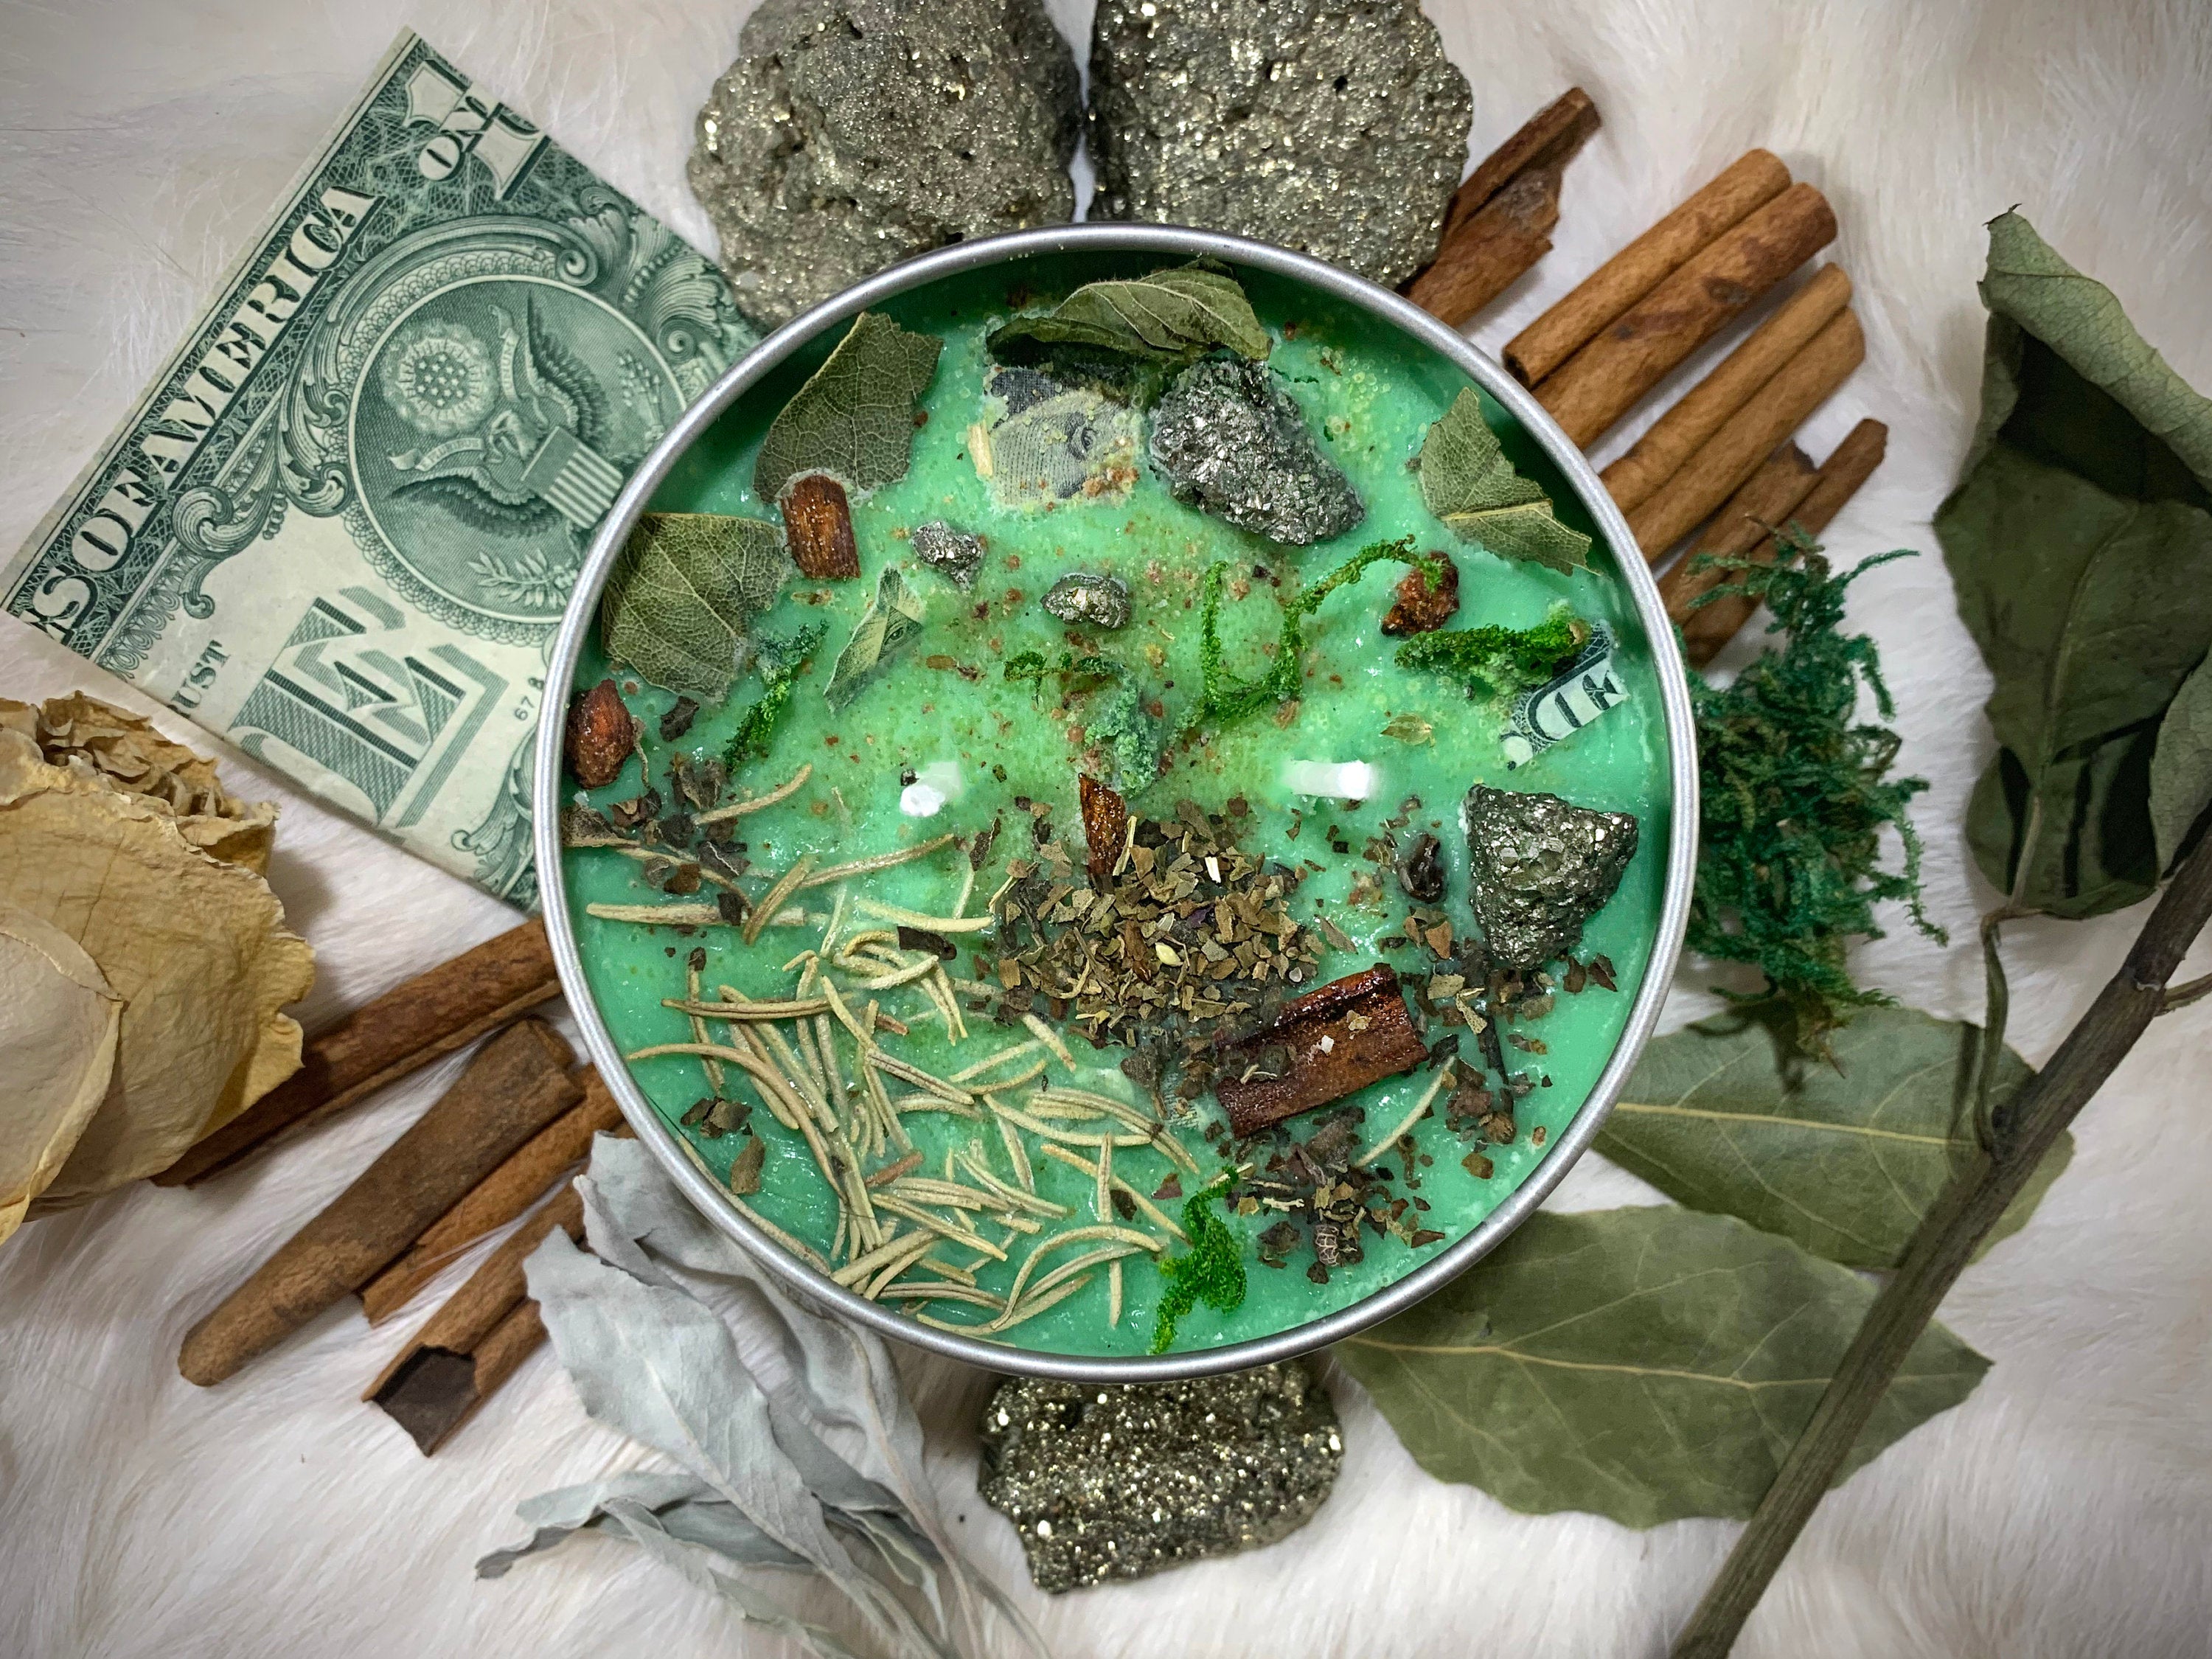 MONEY Spell Candle